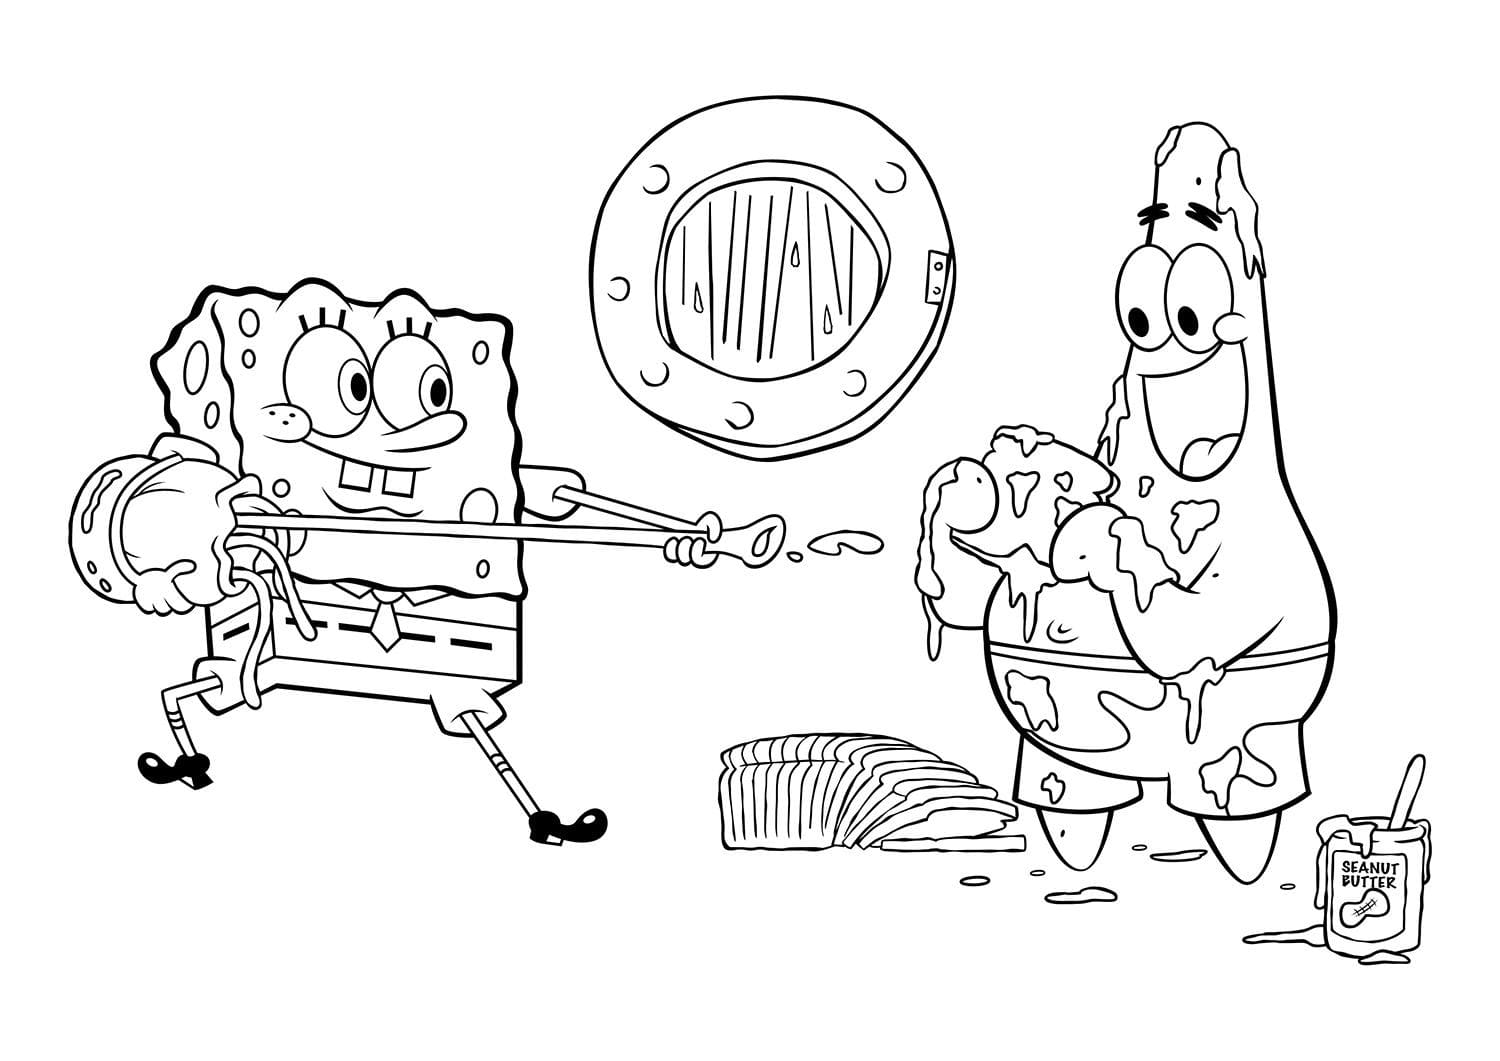 Patrick Star Coloring Pages - 90 Printable Coloring pages